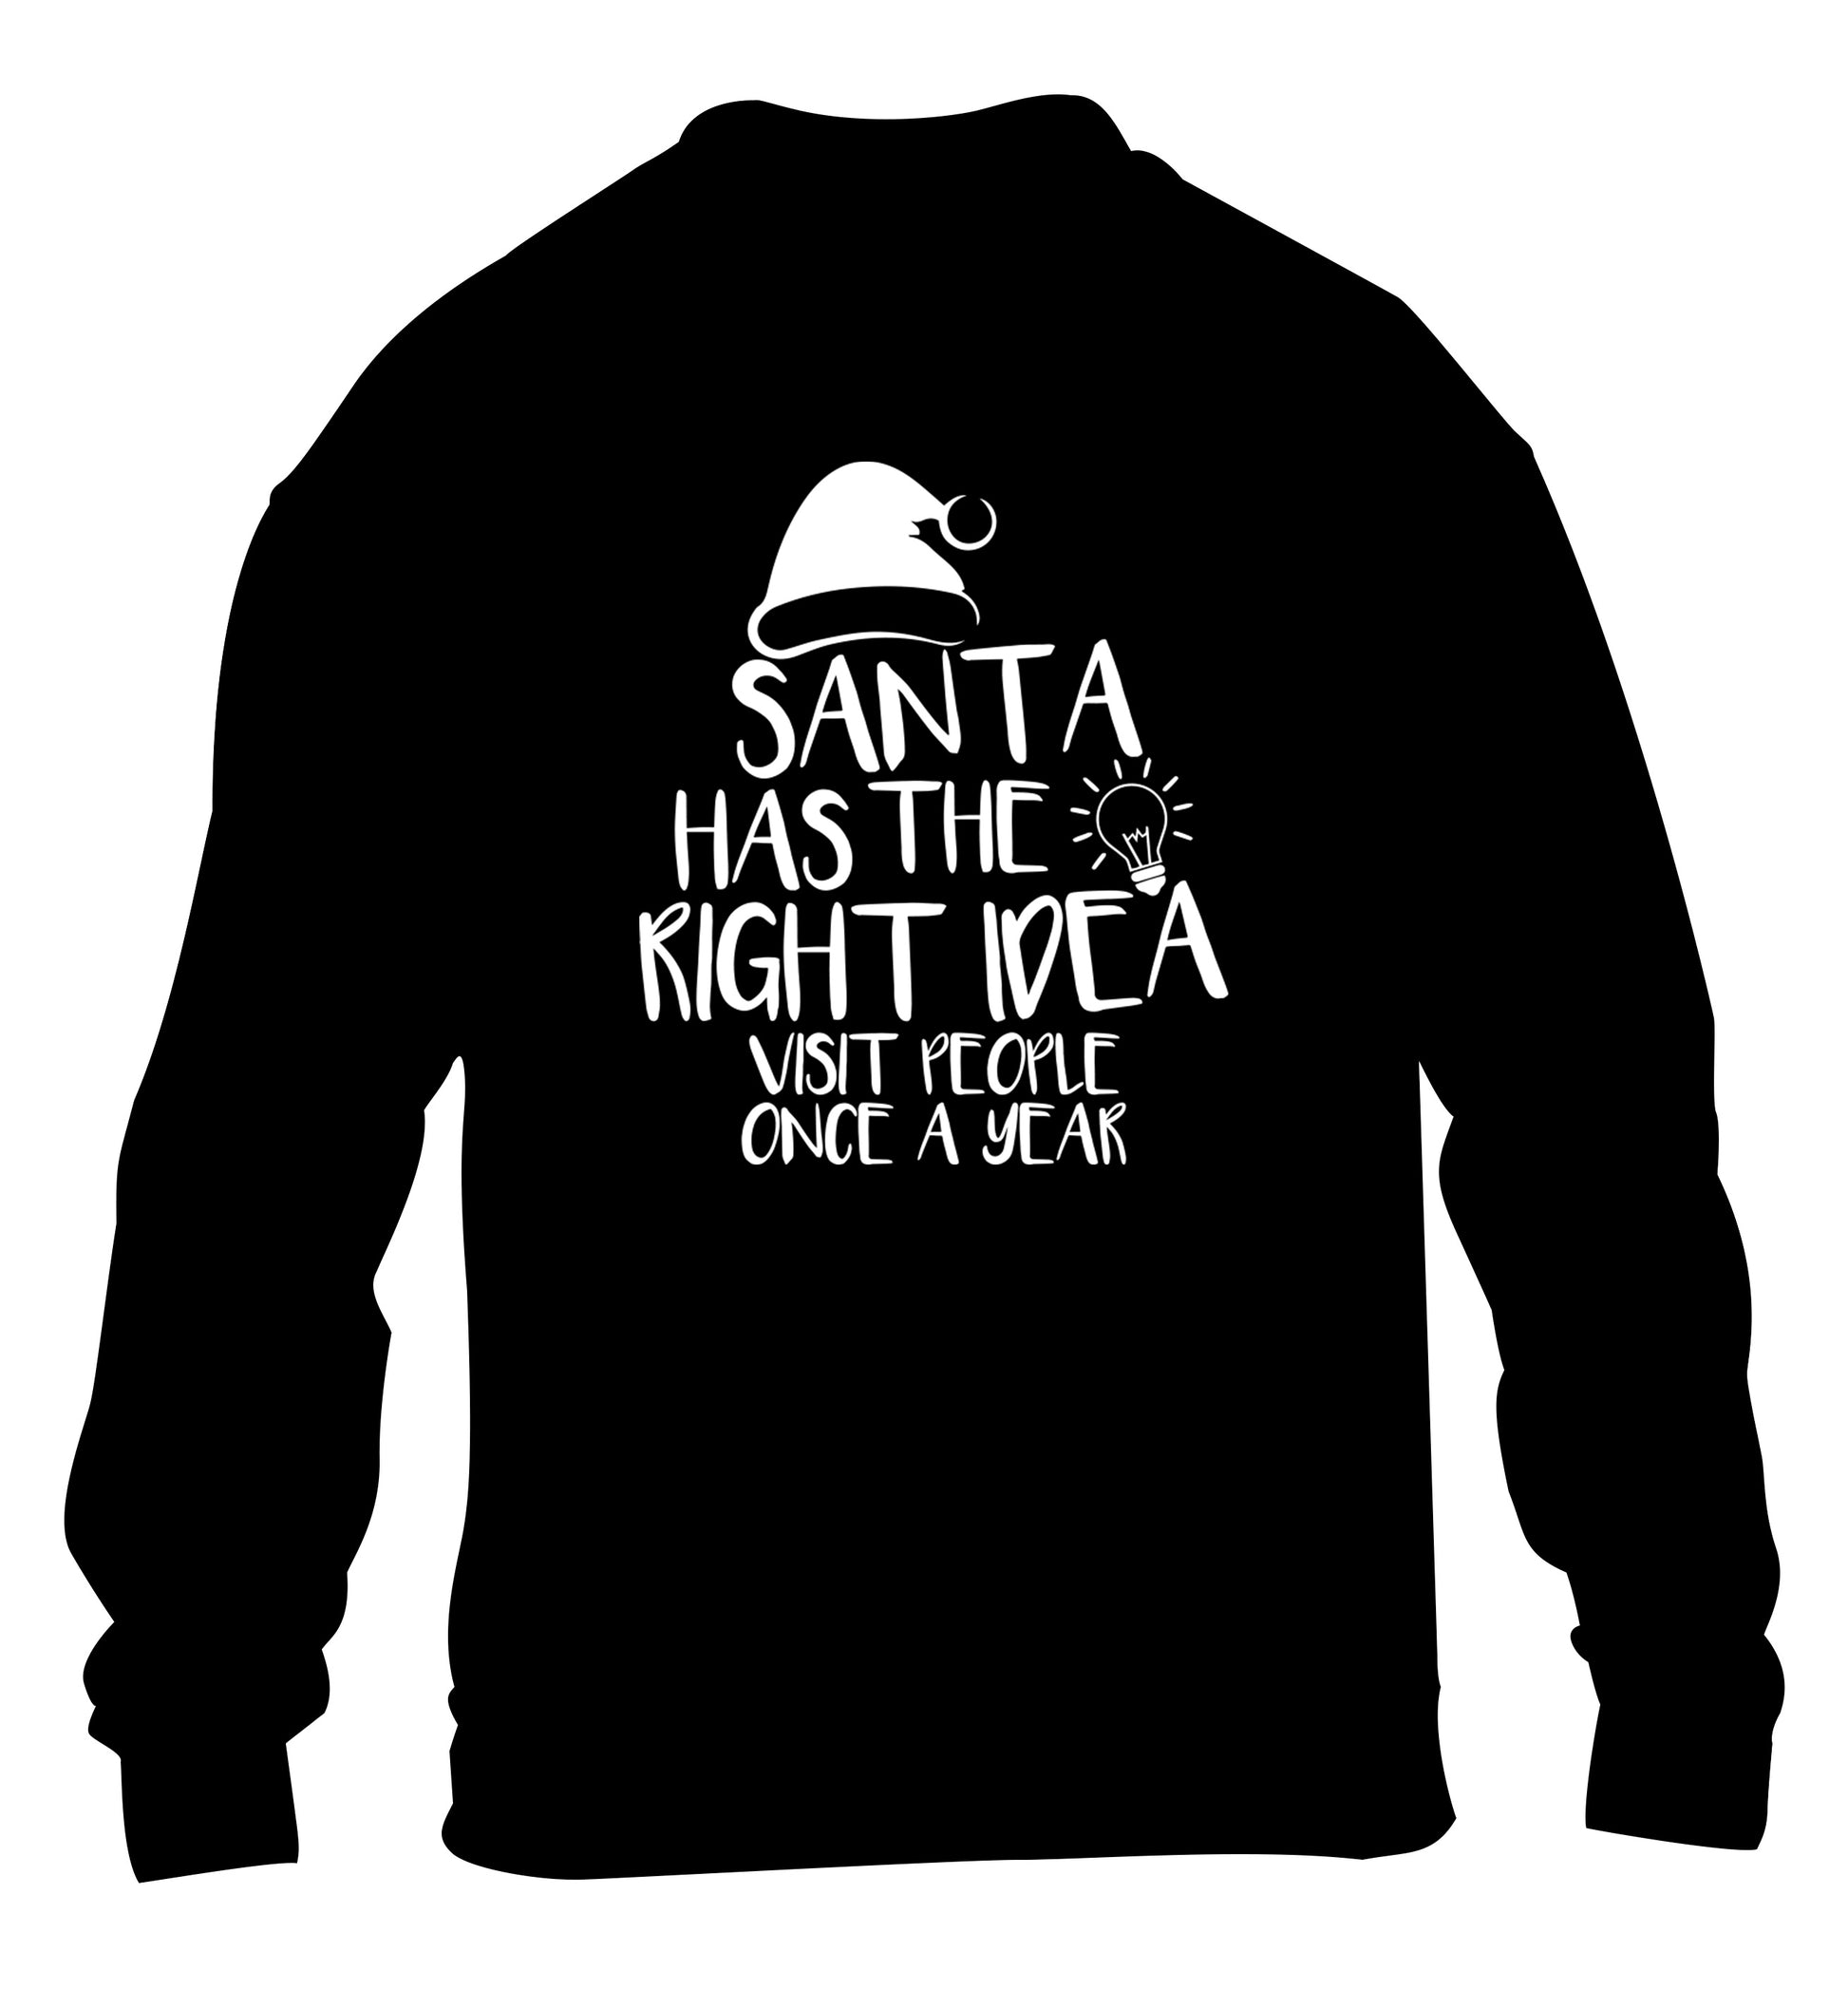 Santa has the right idea visit people once a year children's black sweater 12-14 Years